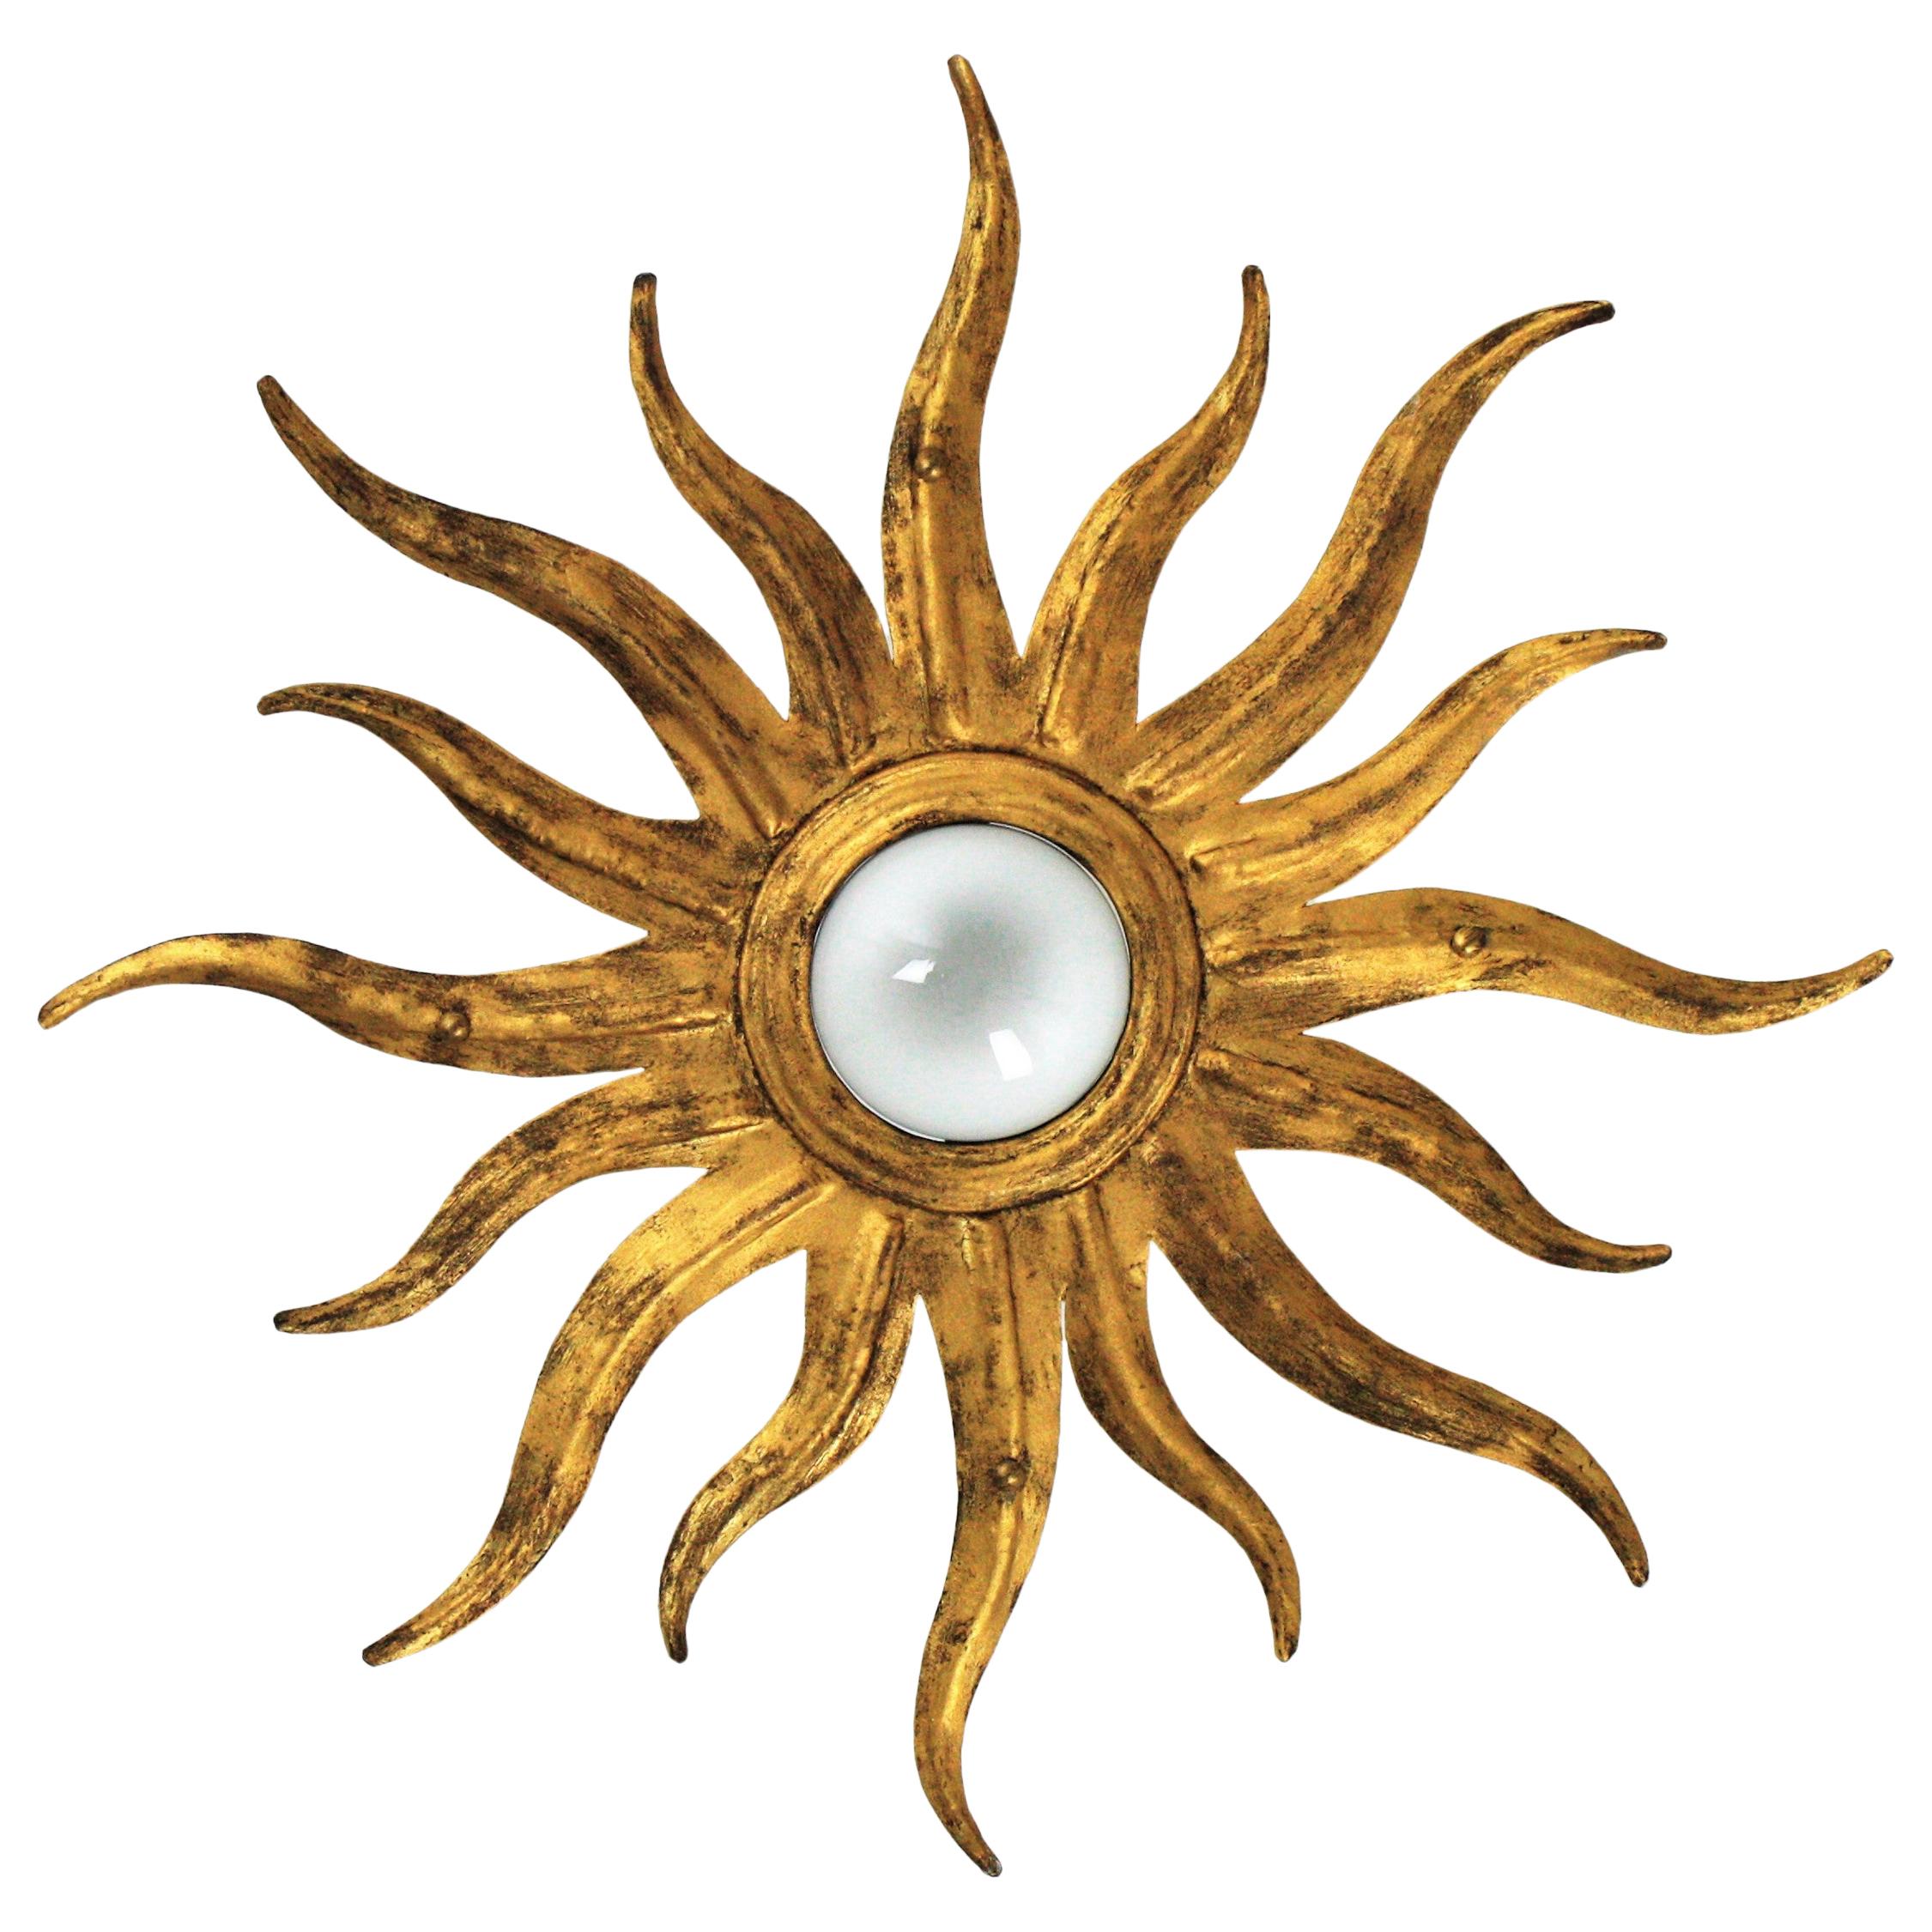 Sunburst starburst flushmount ceiling light fixture in gilt metal, Spain, 1950s
This beautiful hand-hammered gilt iron starburst flush mount with exposed bulb was manufactured at the Mid-Century Modern period with Brutalist and Hollywood Regency